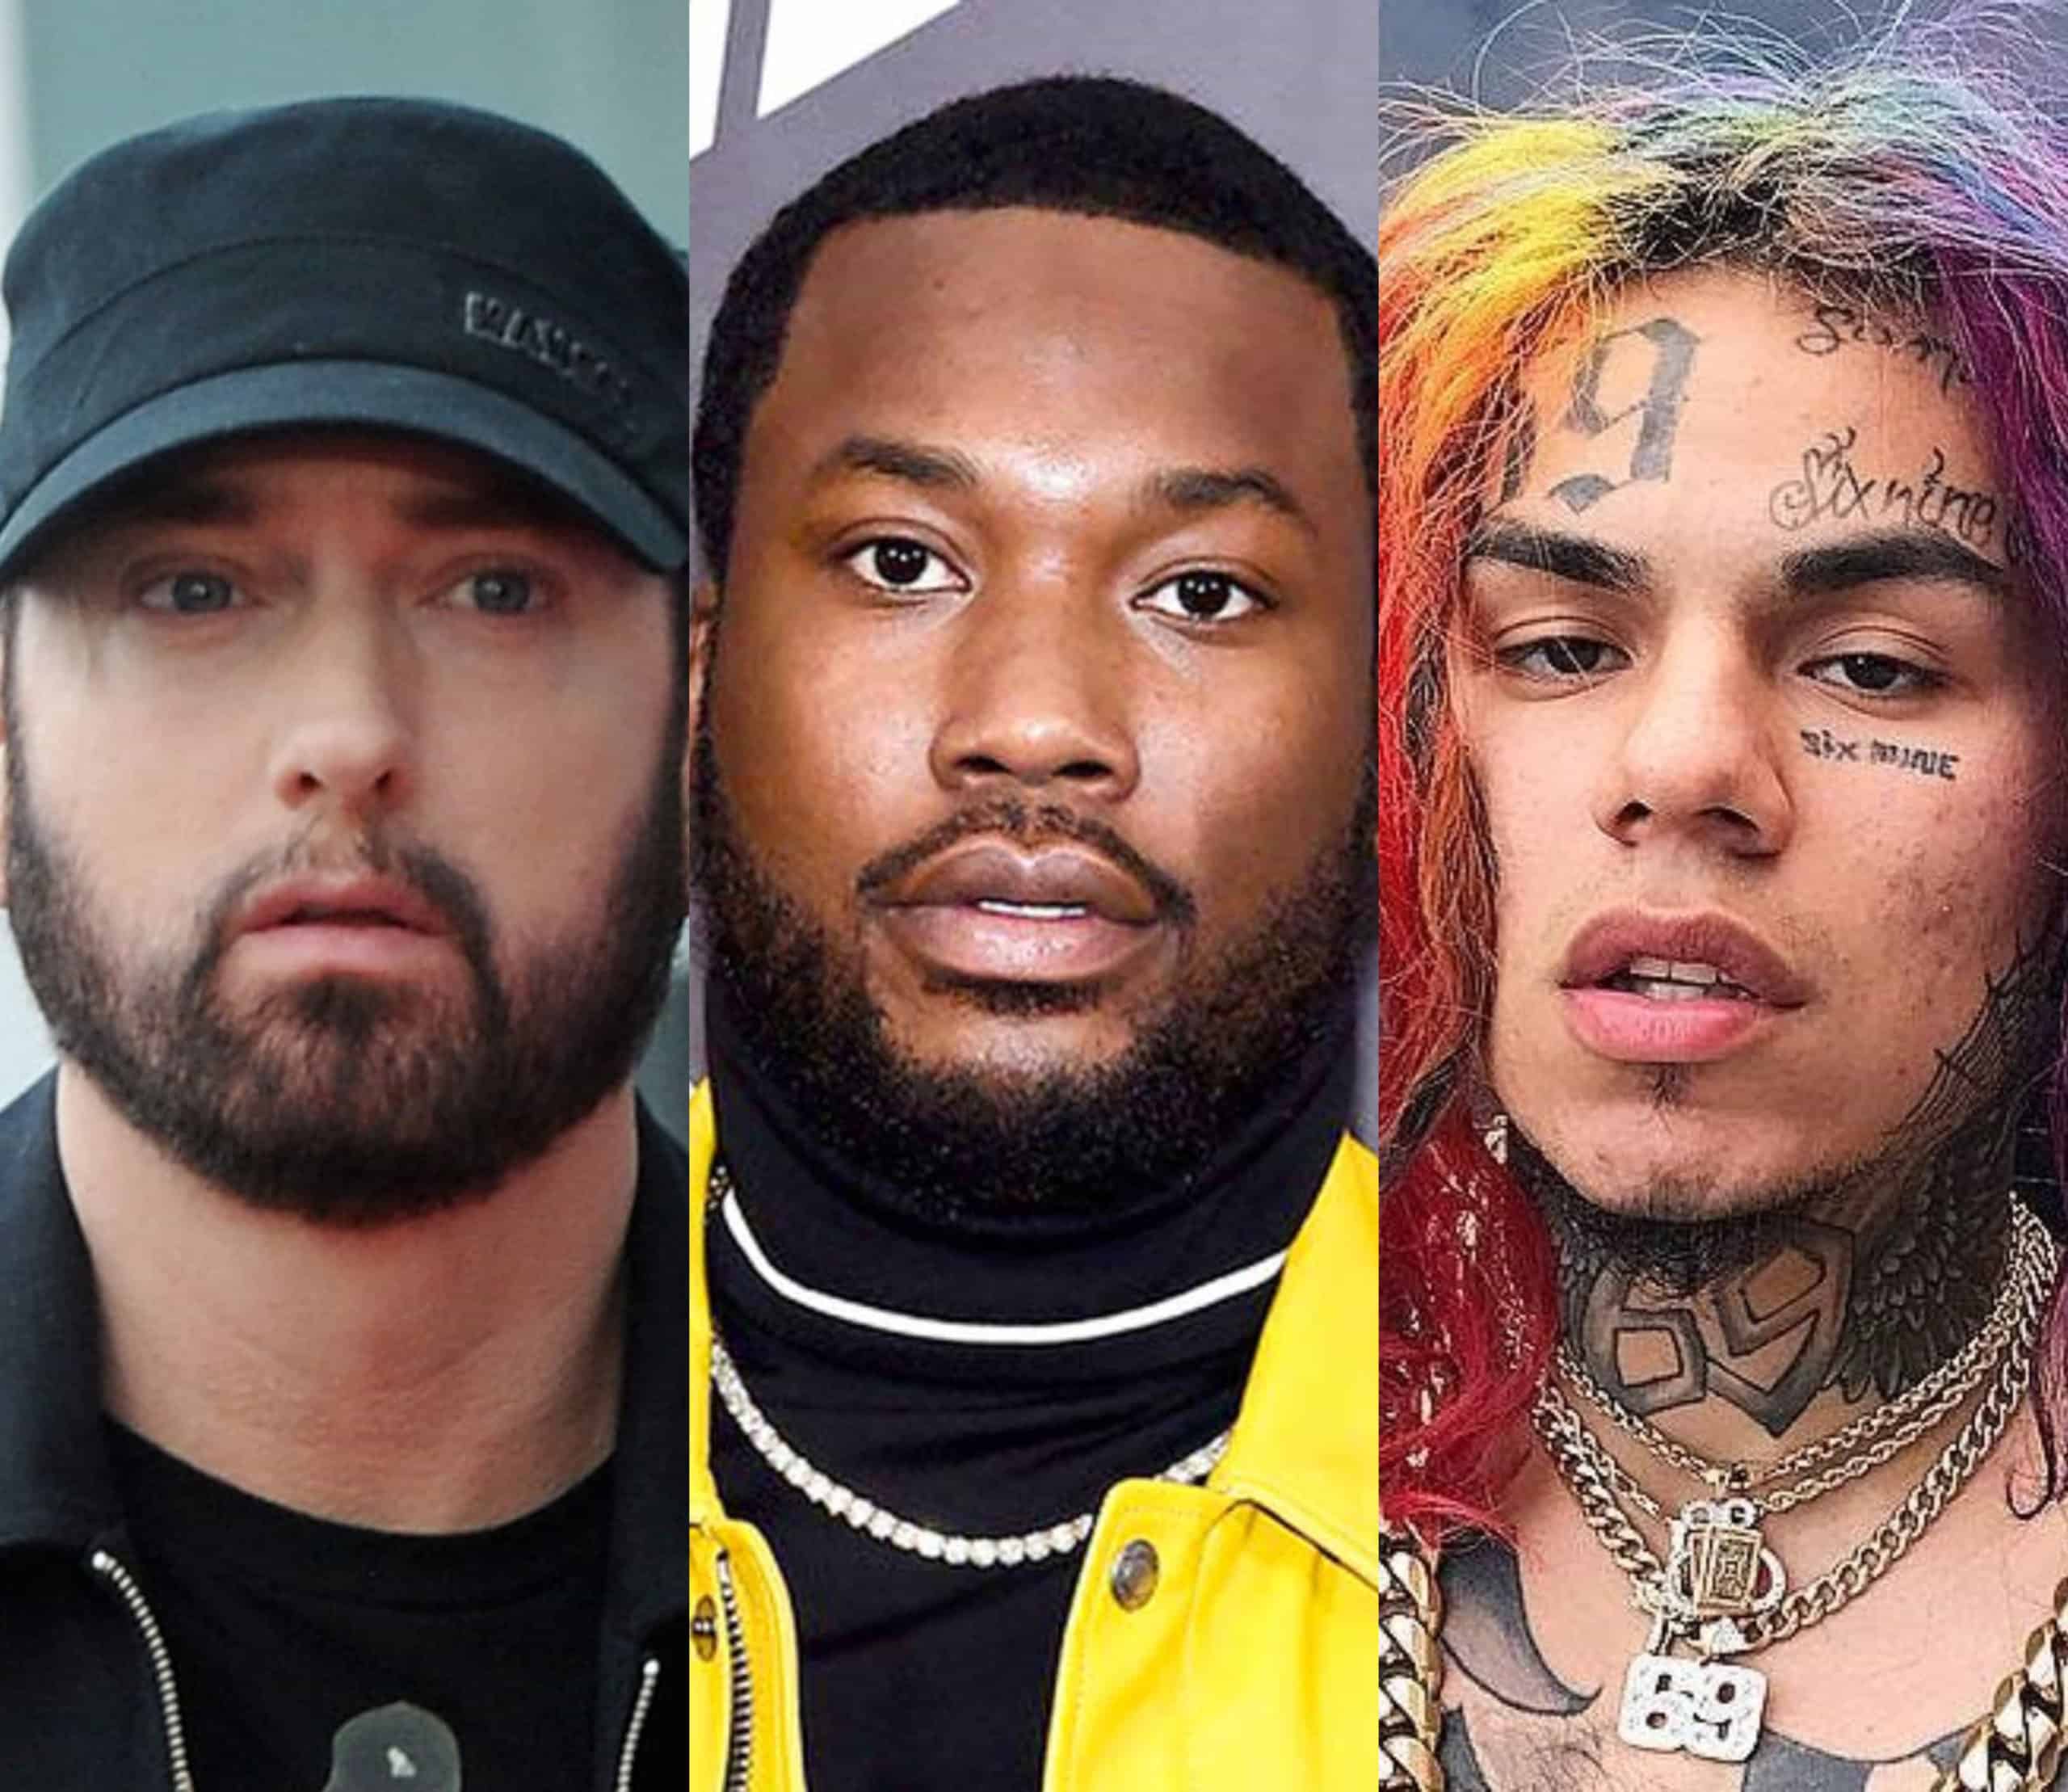 Eminem Takes Shots At 6ix9ine And Shouts Out Meek Mill In His New Verse